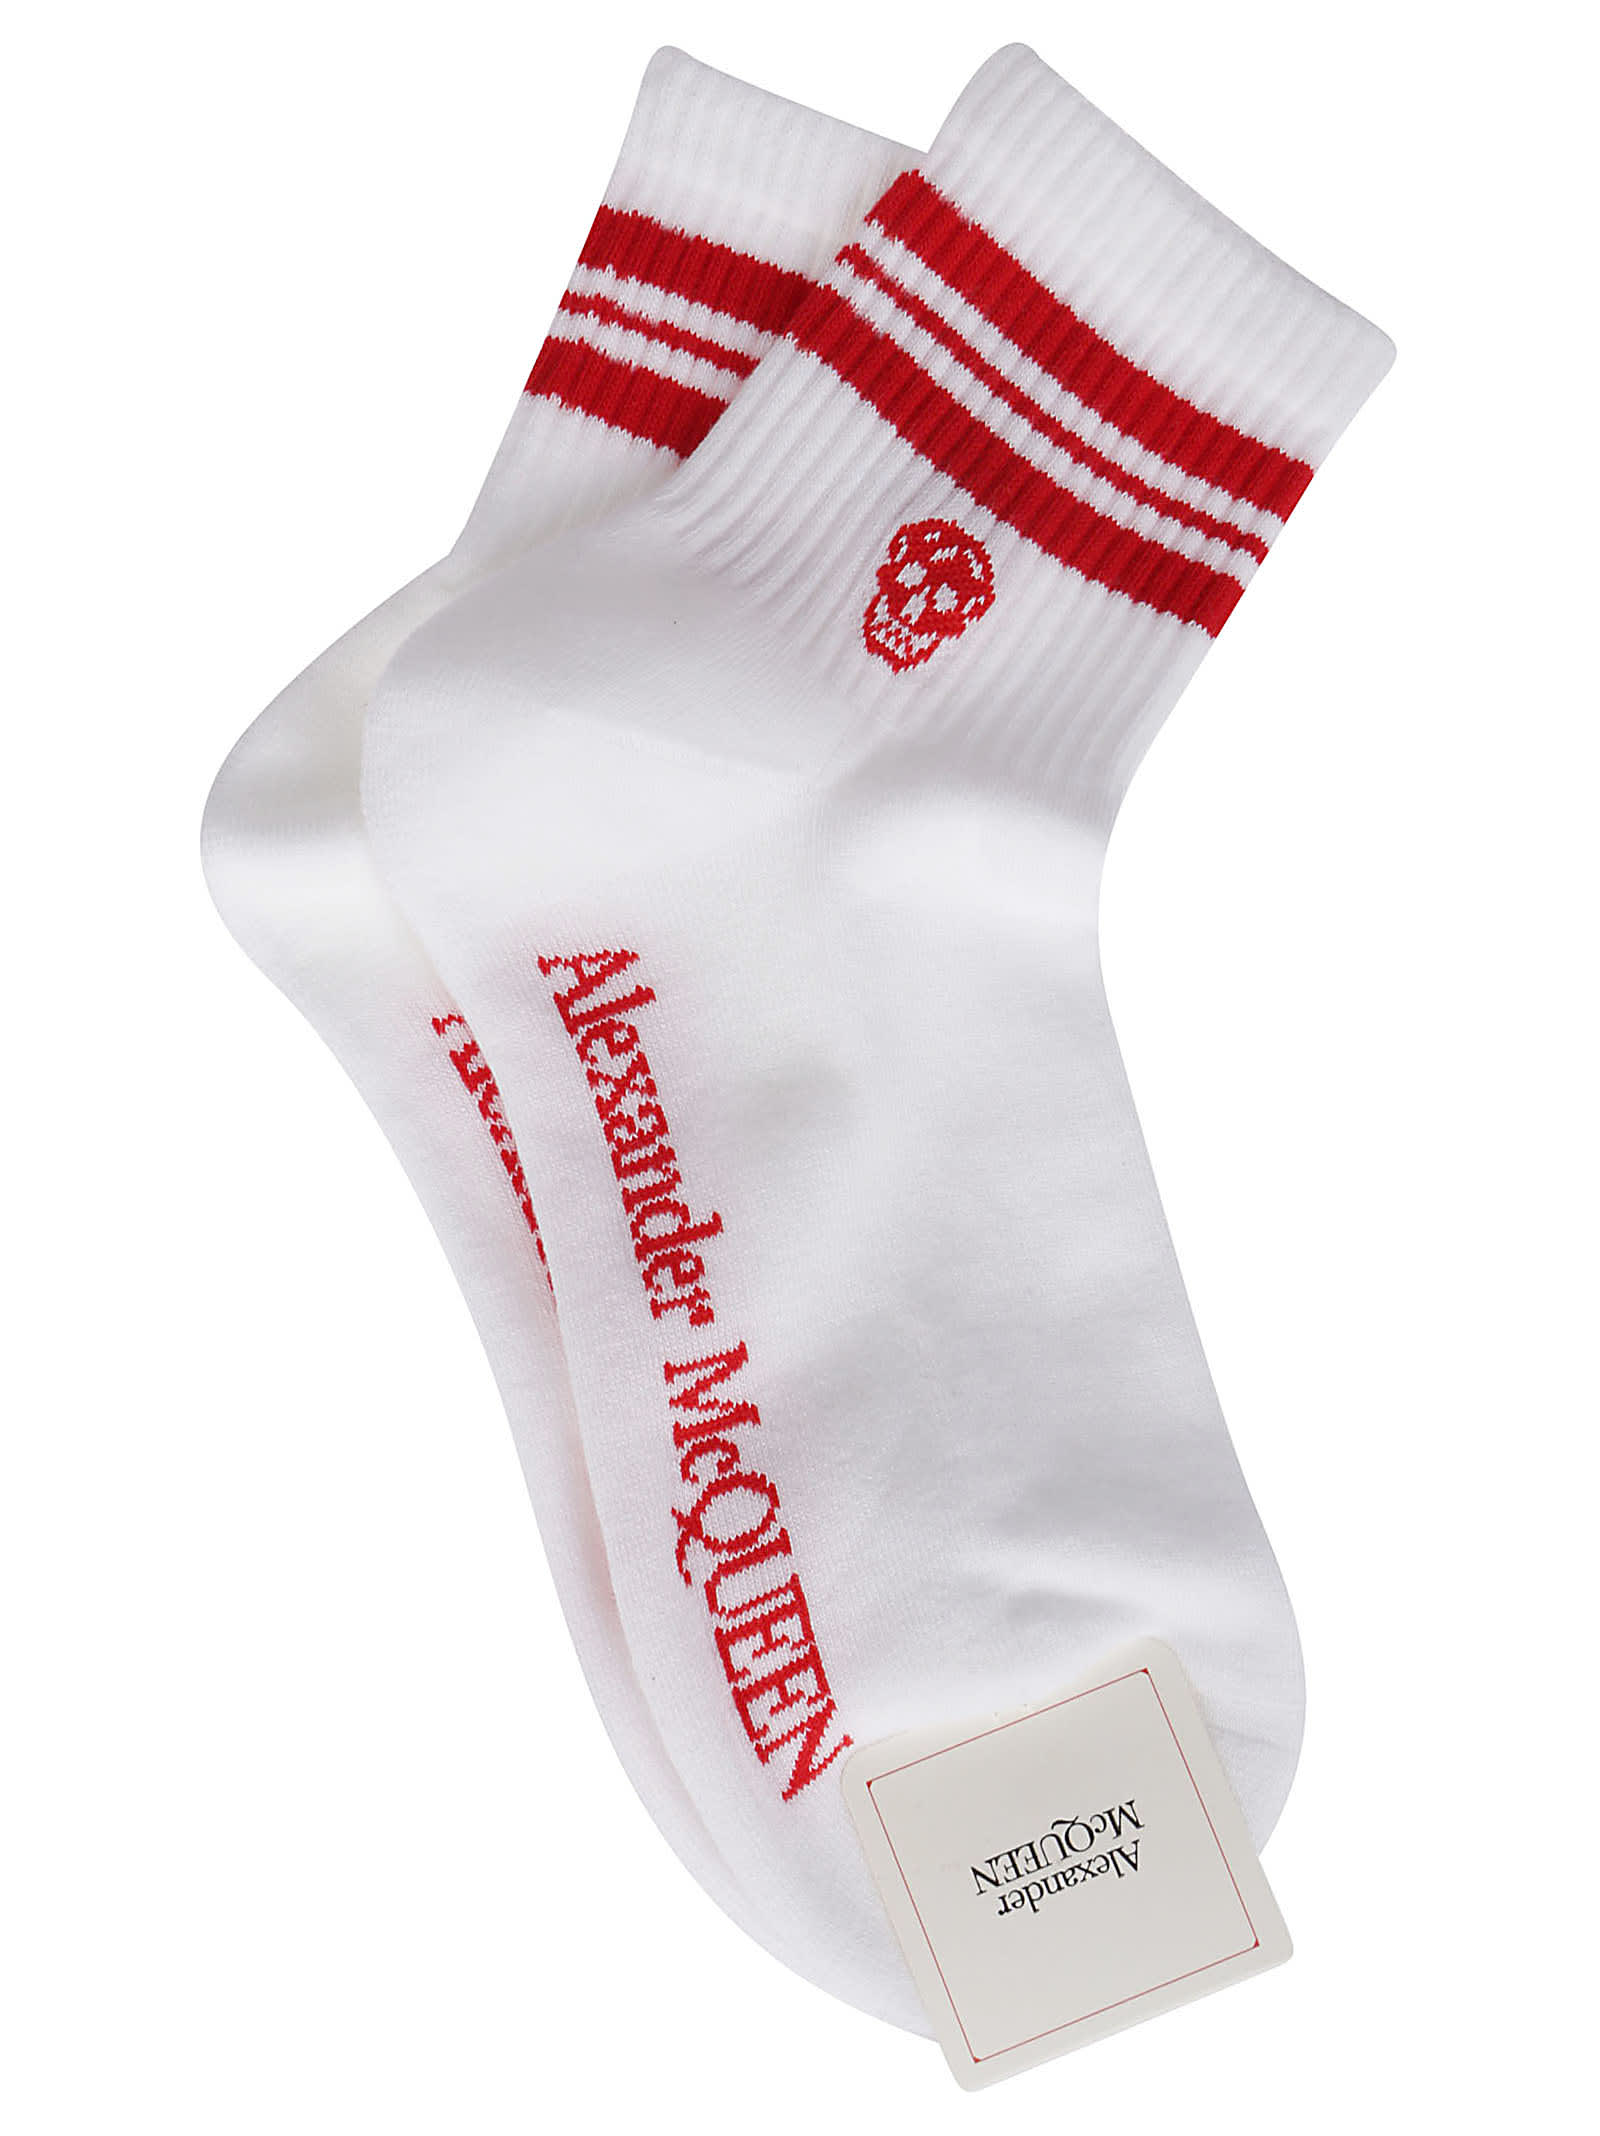 Alexander McQueen White And Red Cotton Socks